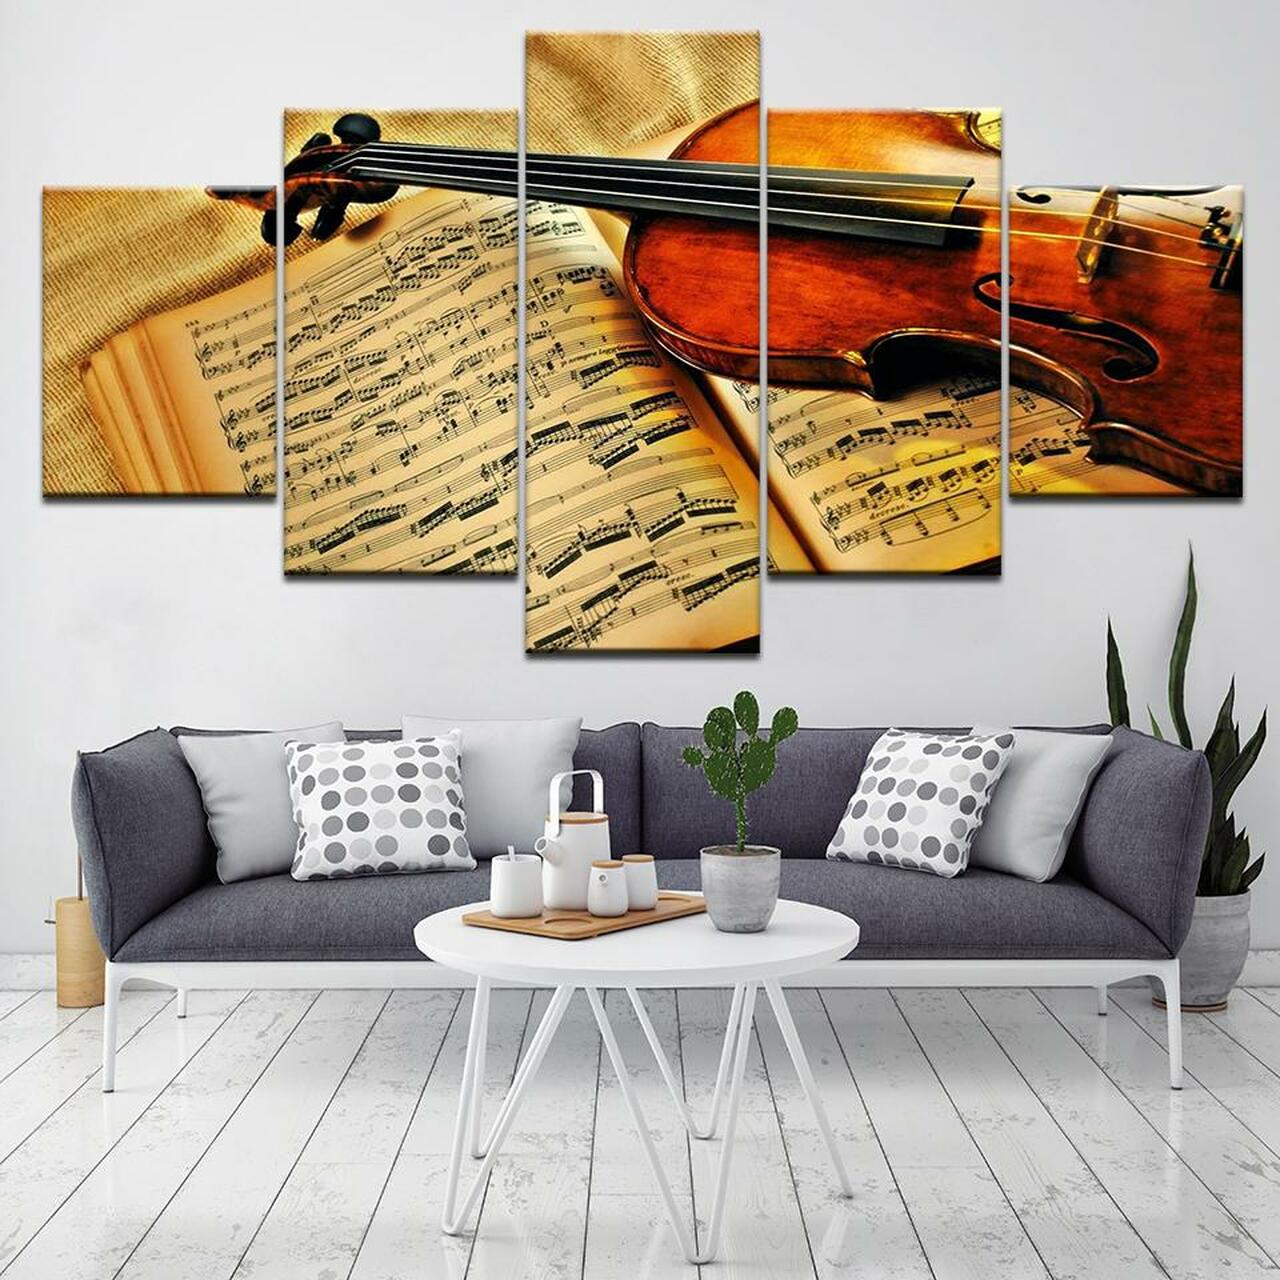 Violin On A Musical Note 5 Piece Canvas Art Wall Decor